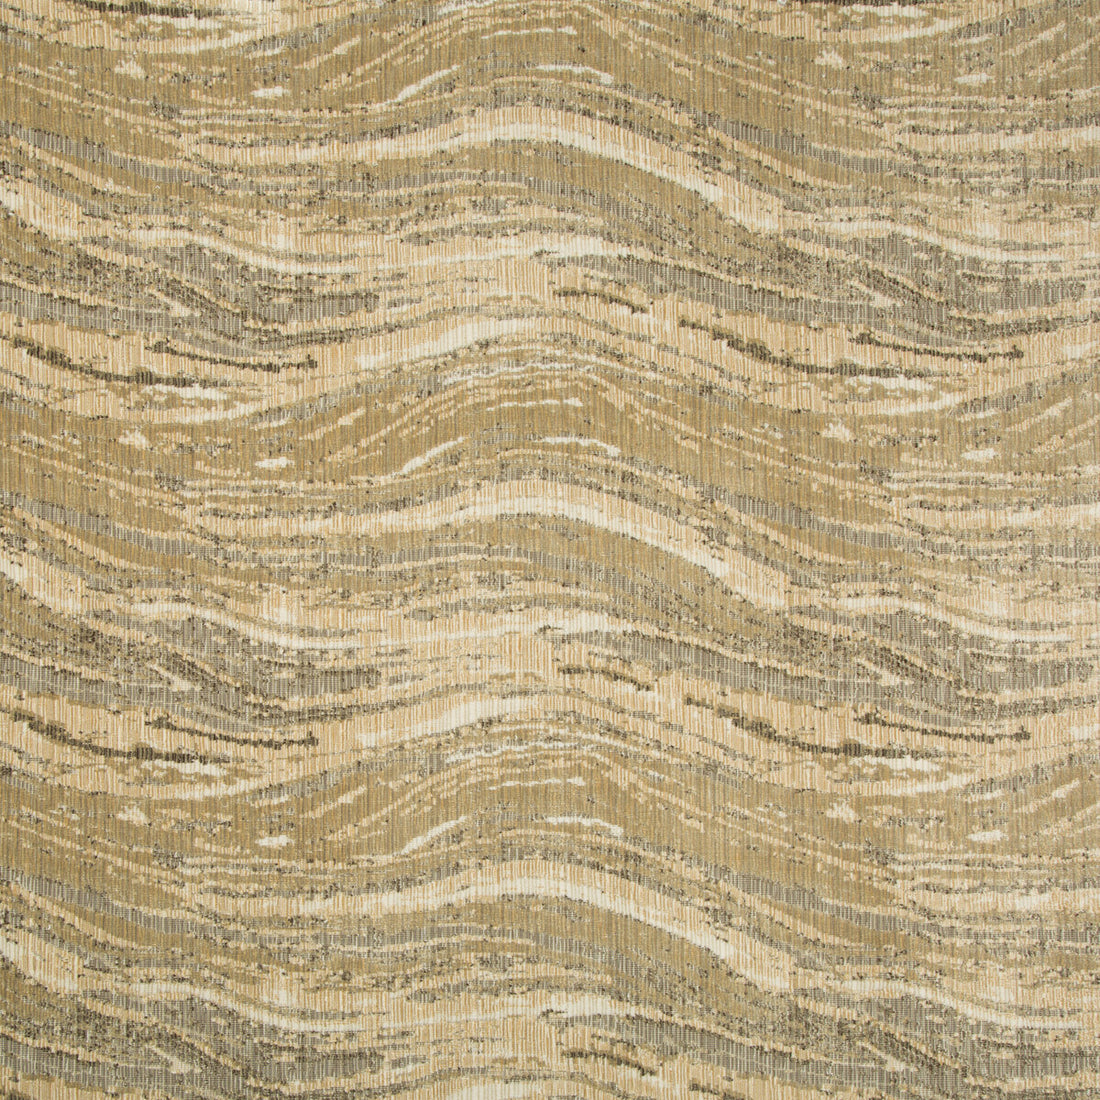 Strati Velvet fabric in sandstone color - pattern 34787.16.0 - by Kravet Couture in the Artisan Velvets collection